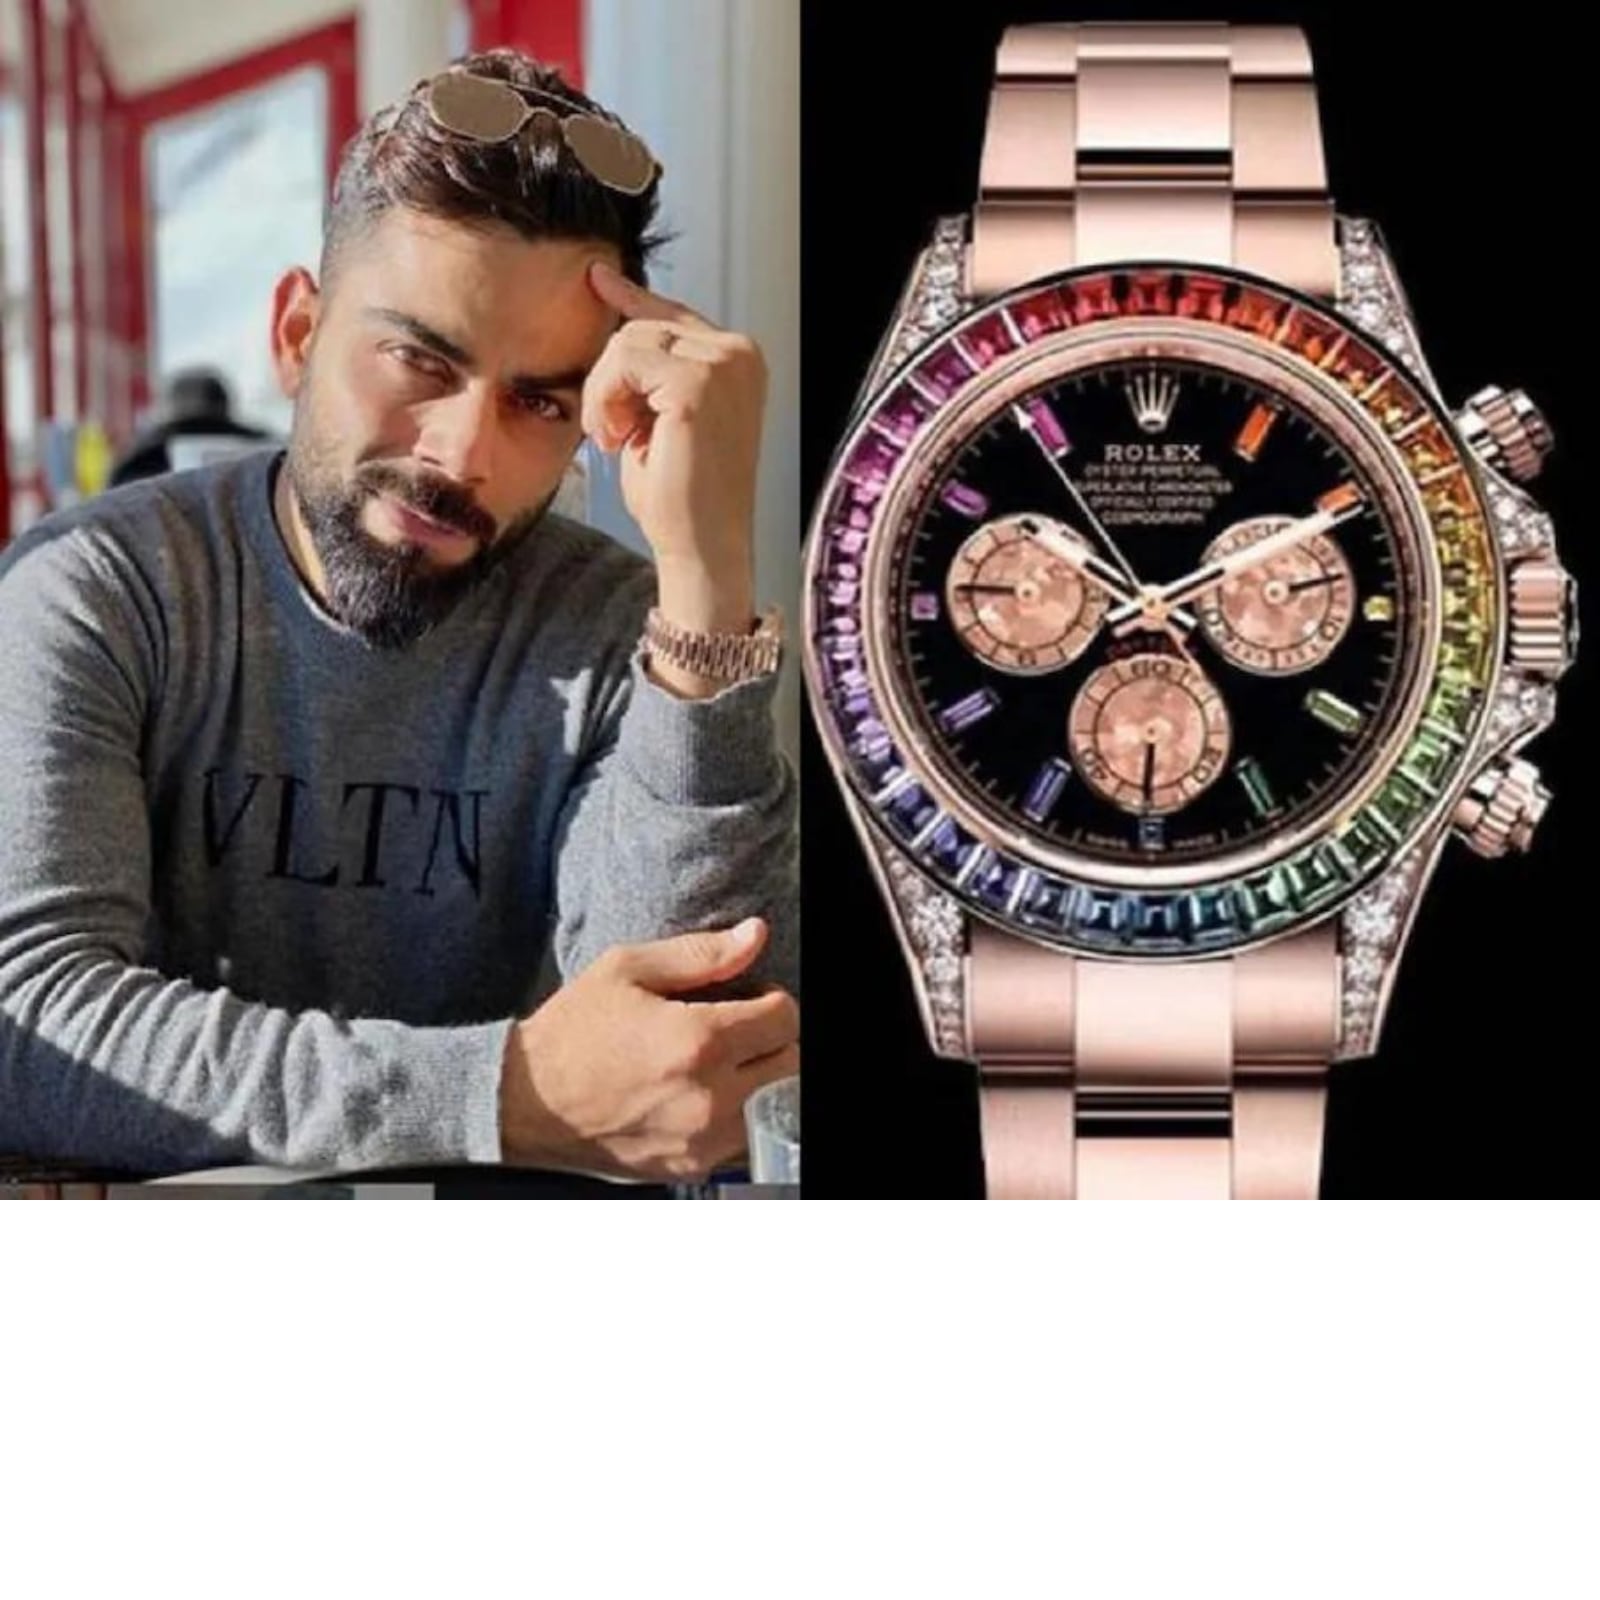 Bollywood Stars and their A-Game with Luxury Watches